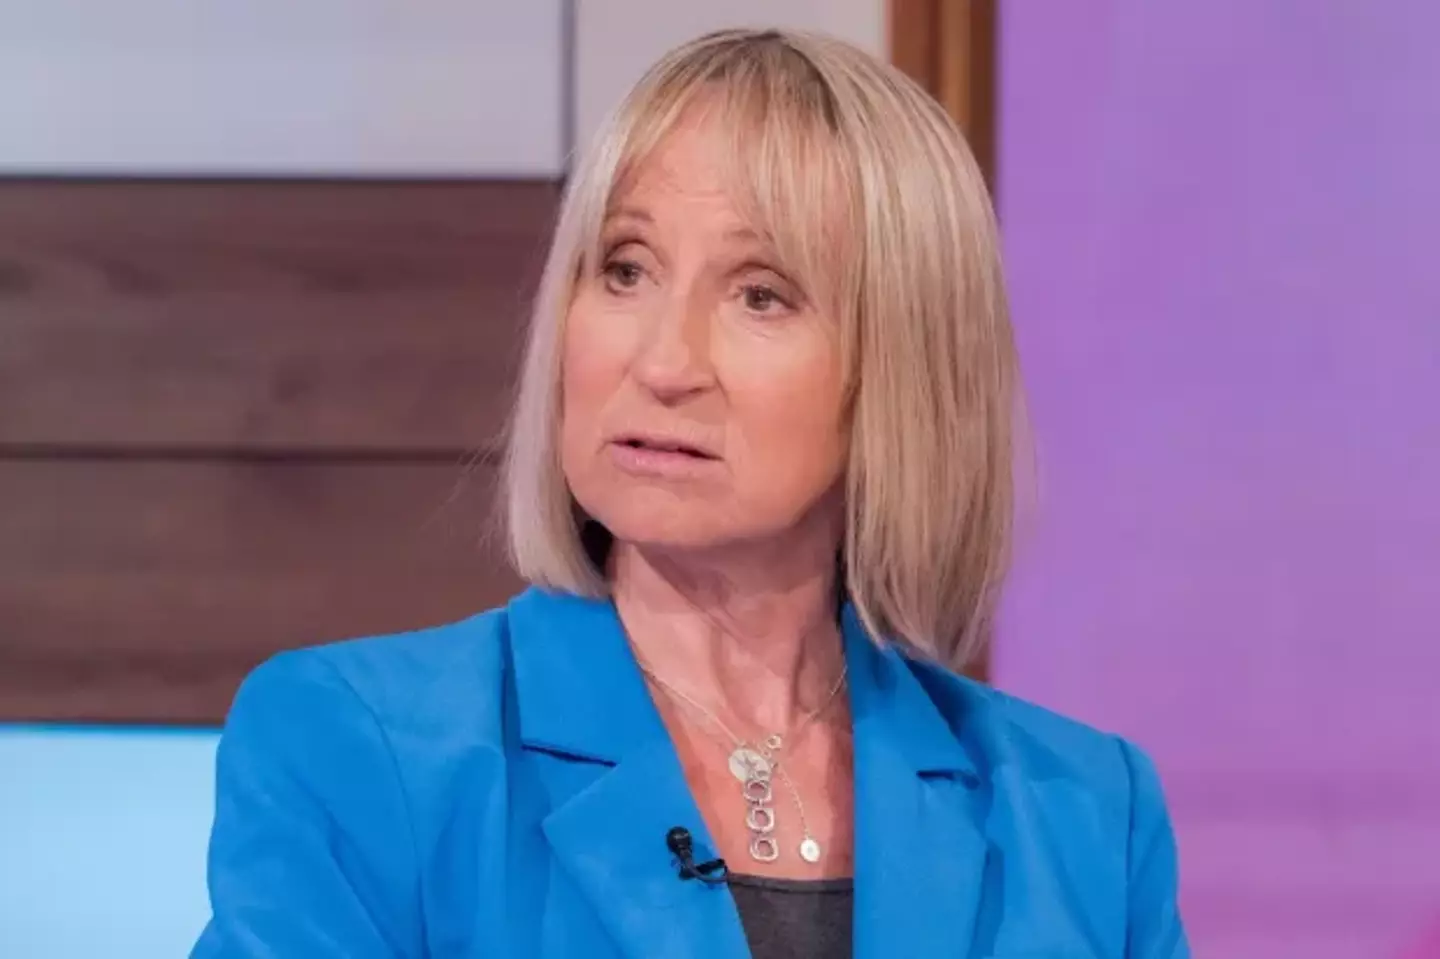 Carol McGiffin first joined Loose Women in 2000.